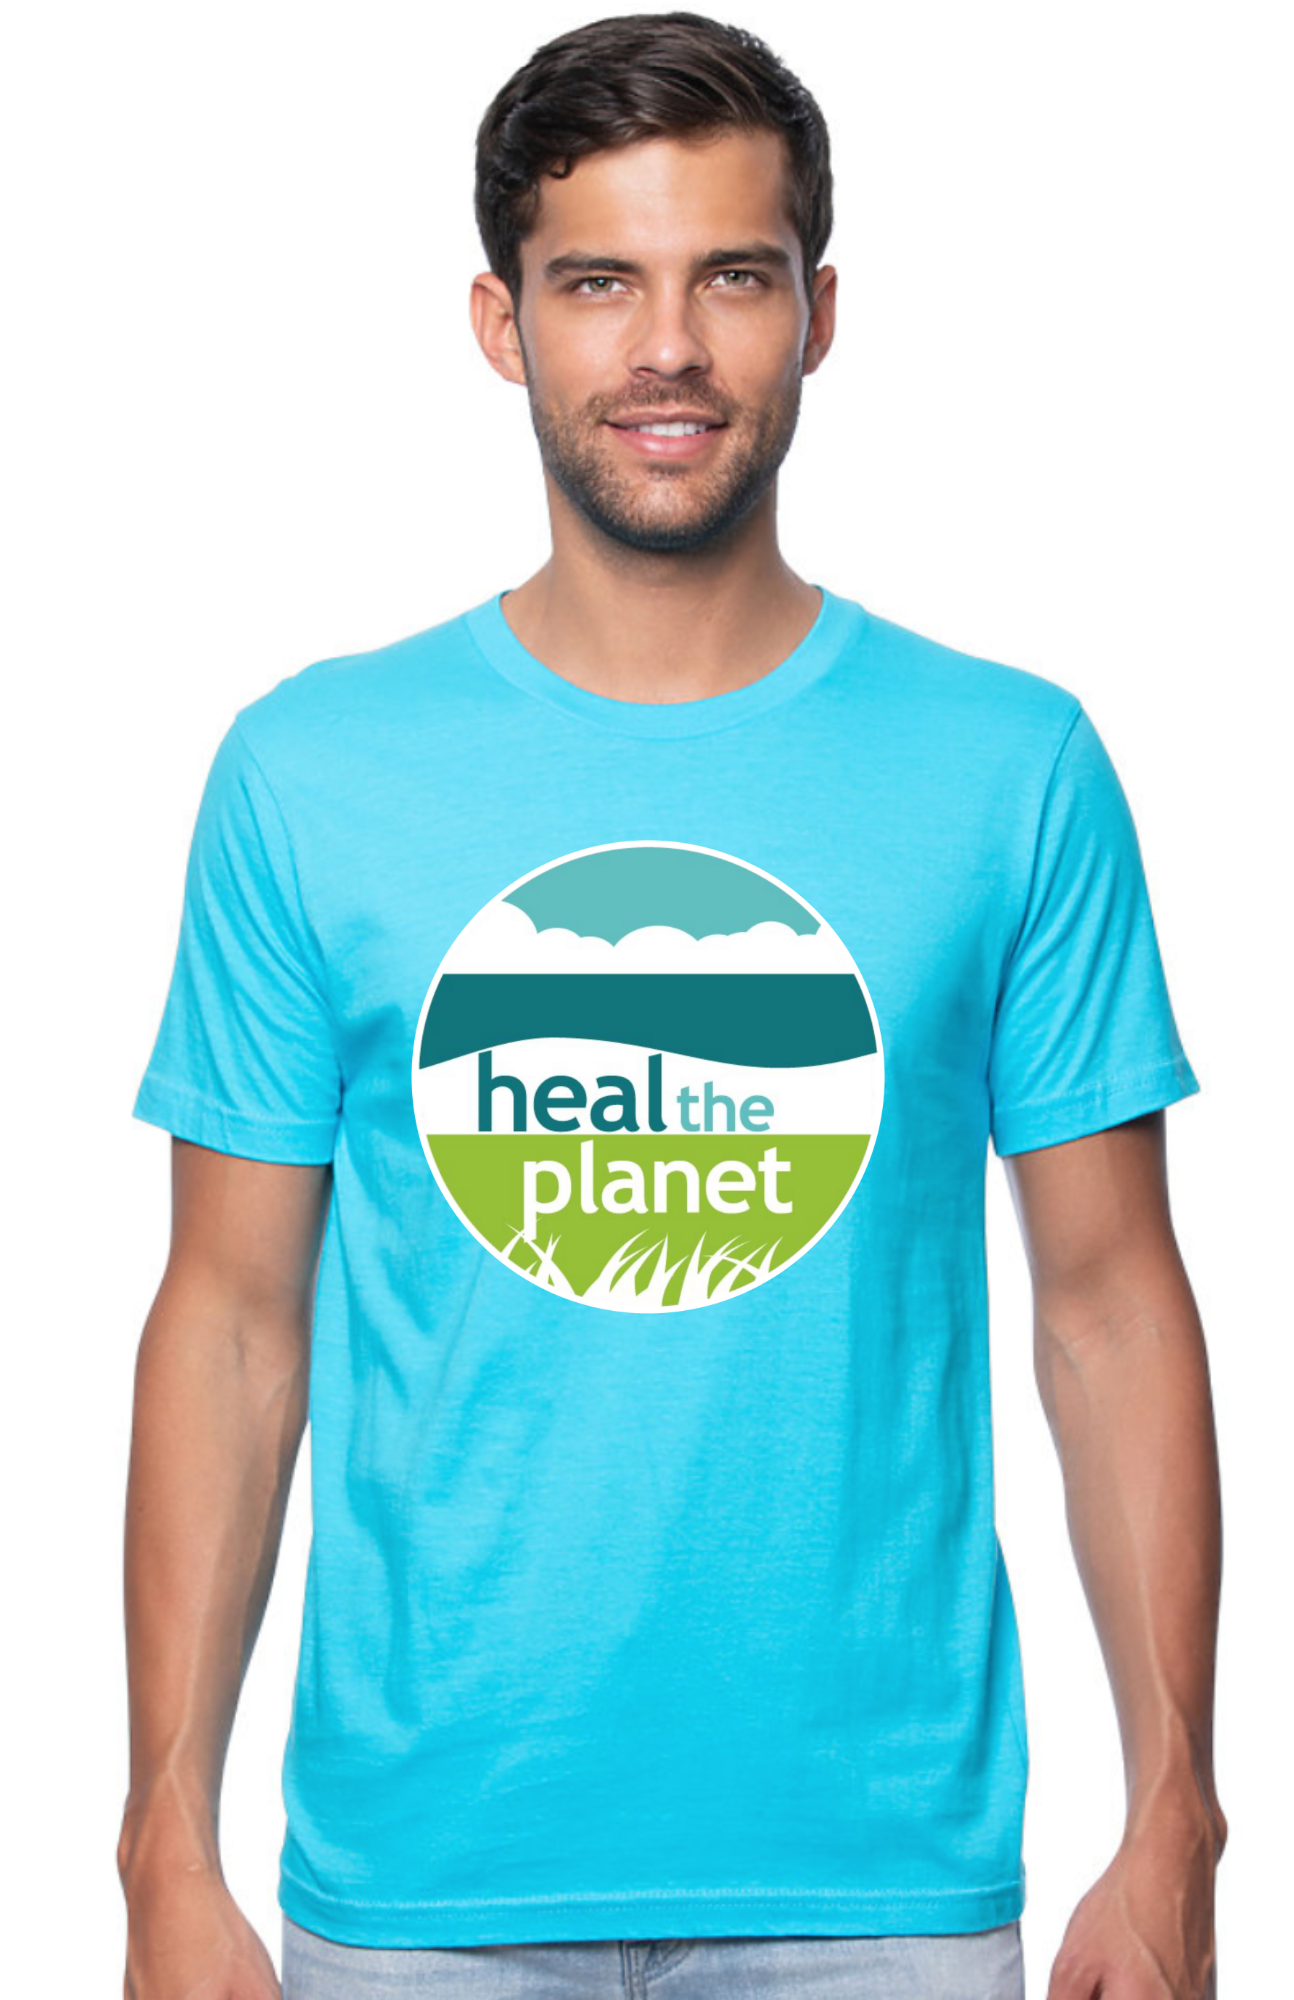 Heal The Planet Tee - Turquoise - Unisex